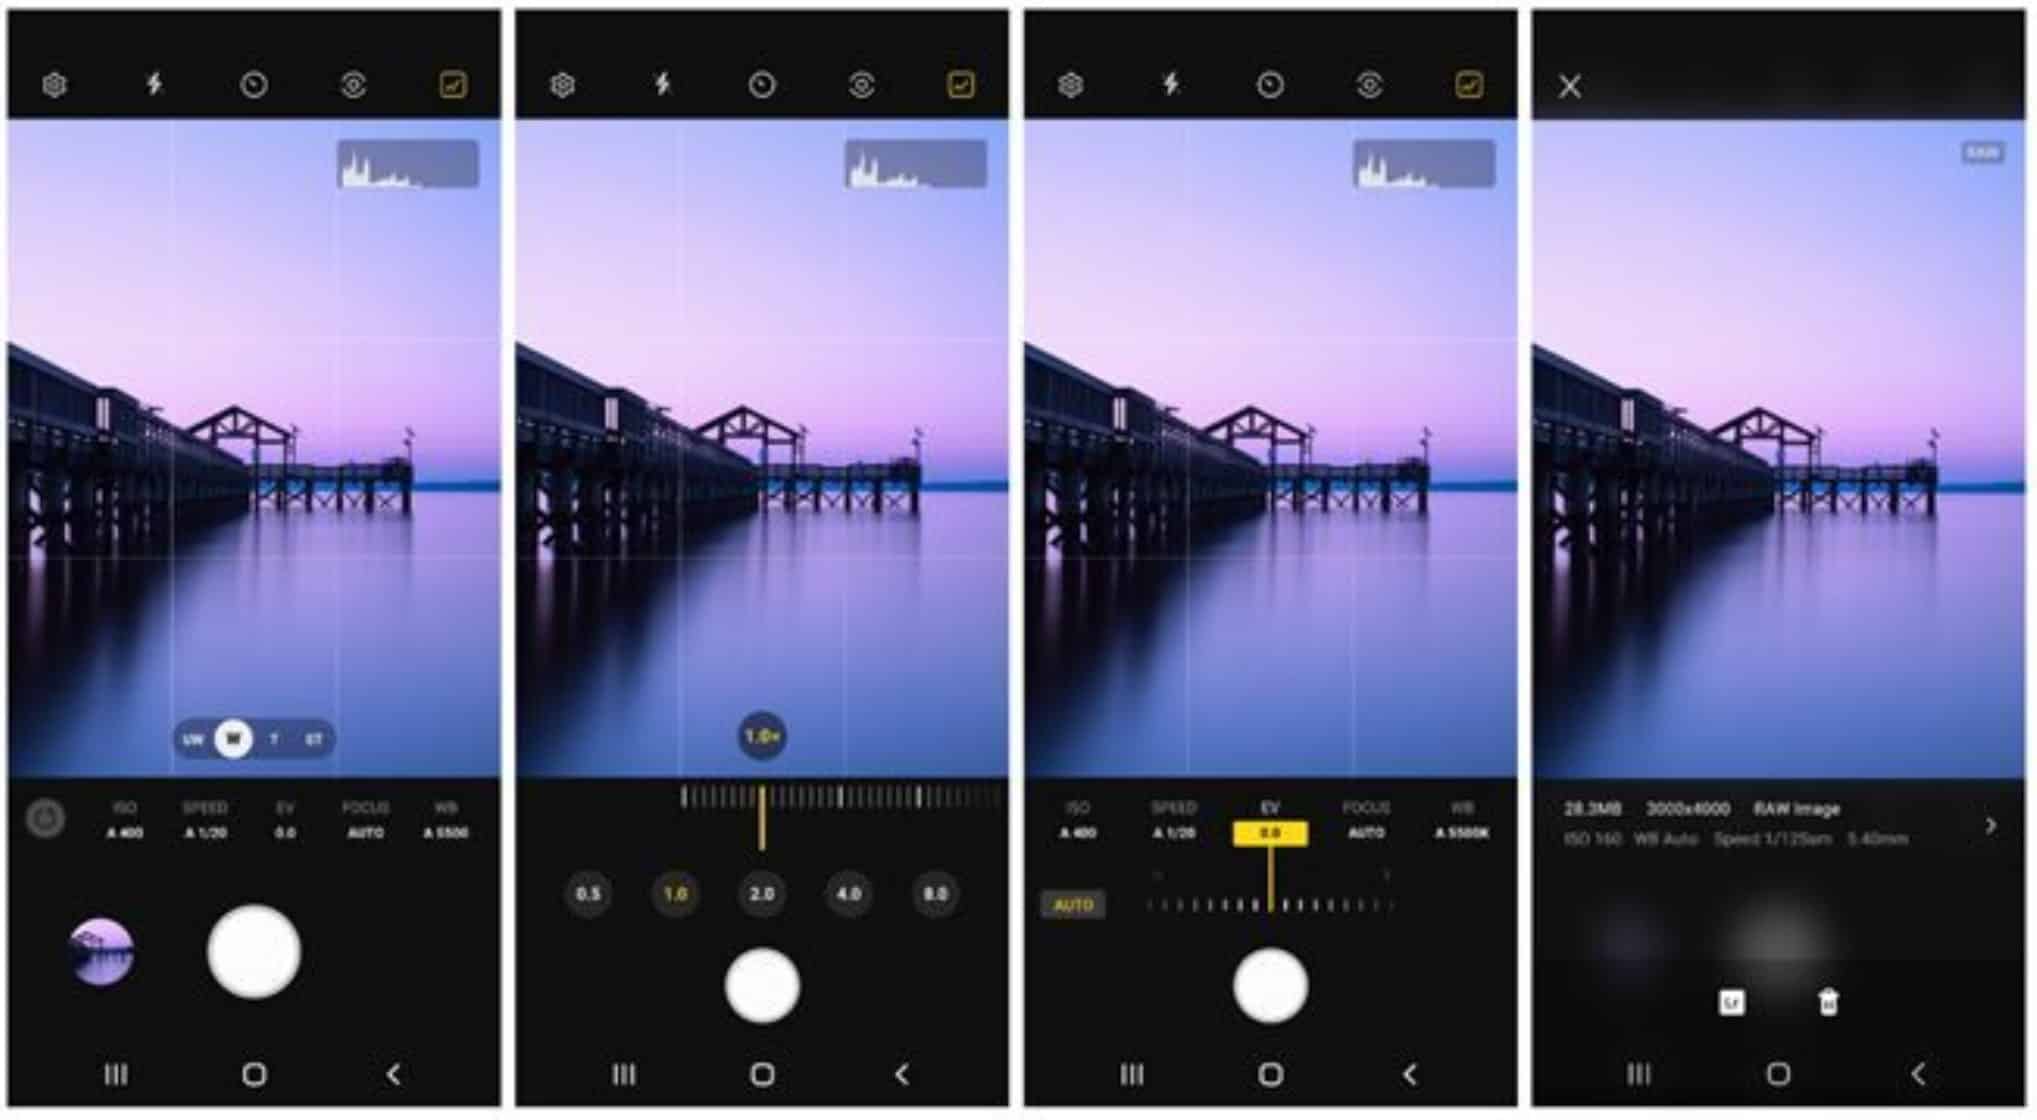 Samsung Expert RAW app brings professional image capture capabilities to Galaxy S21 series